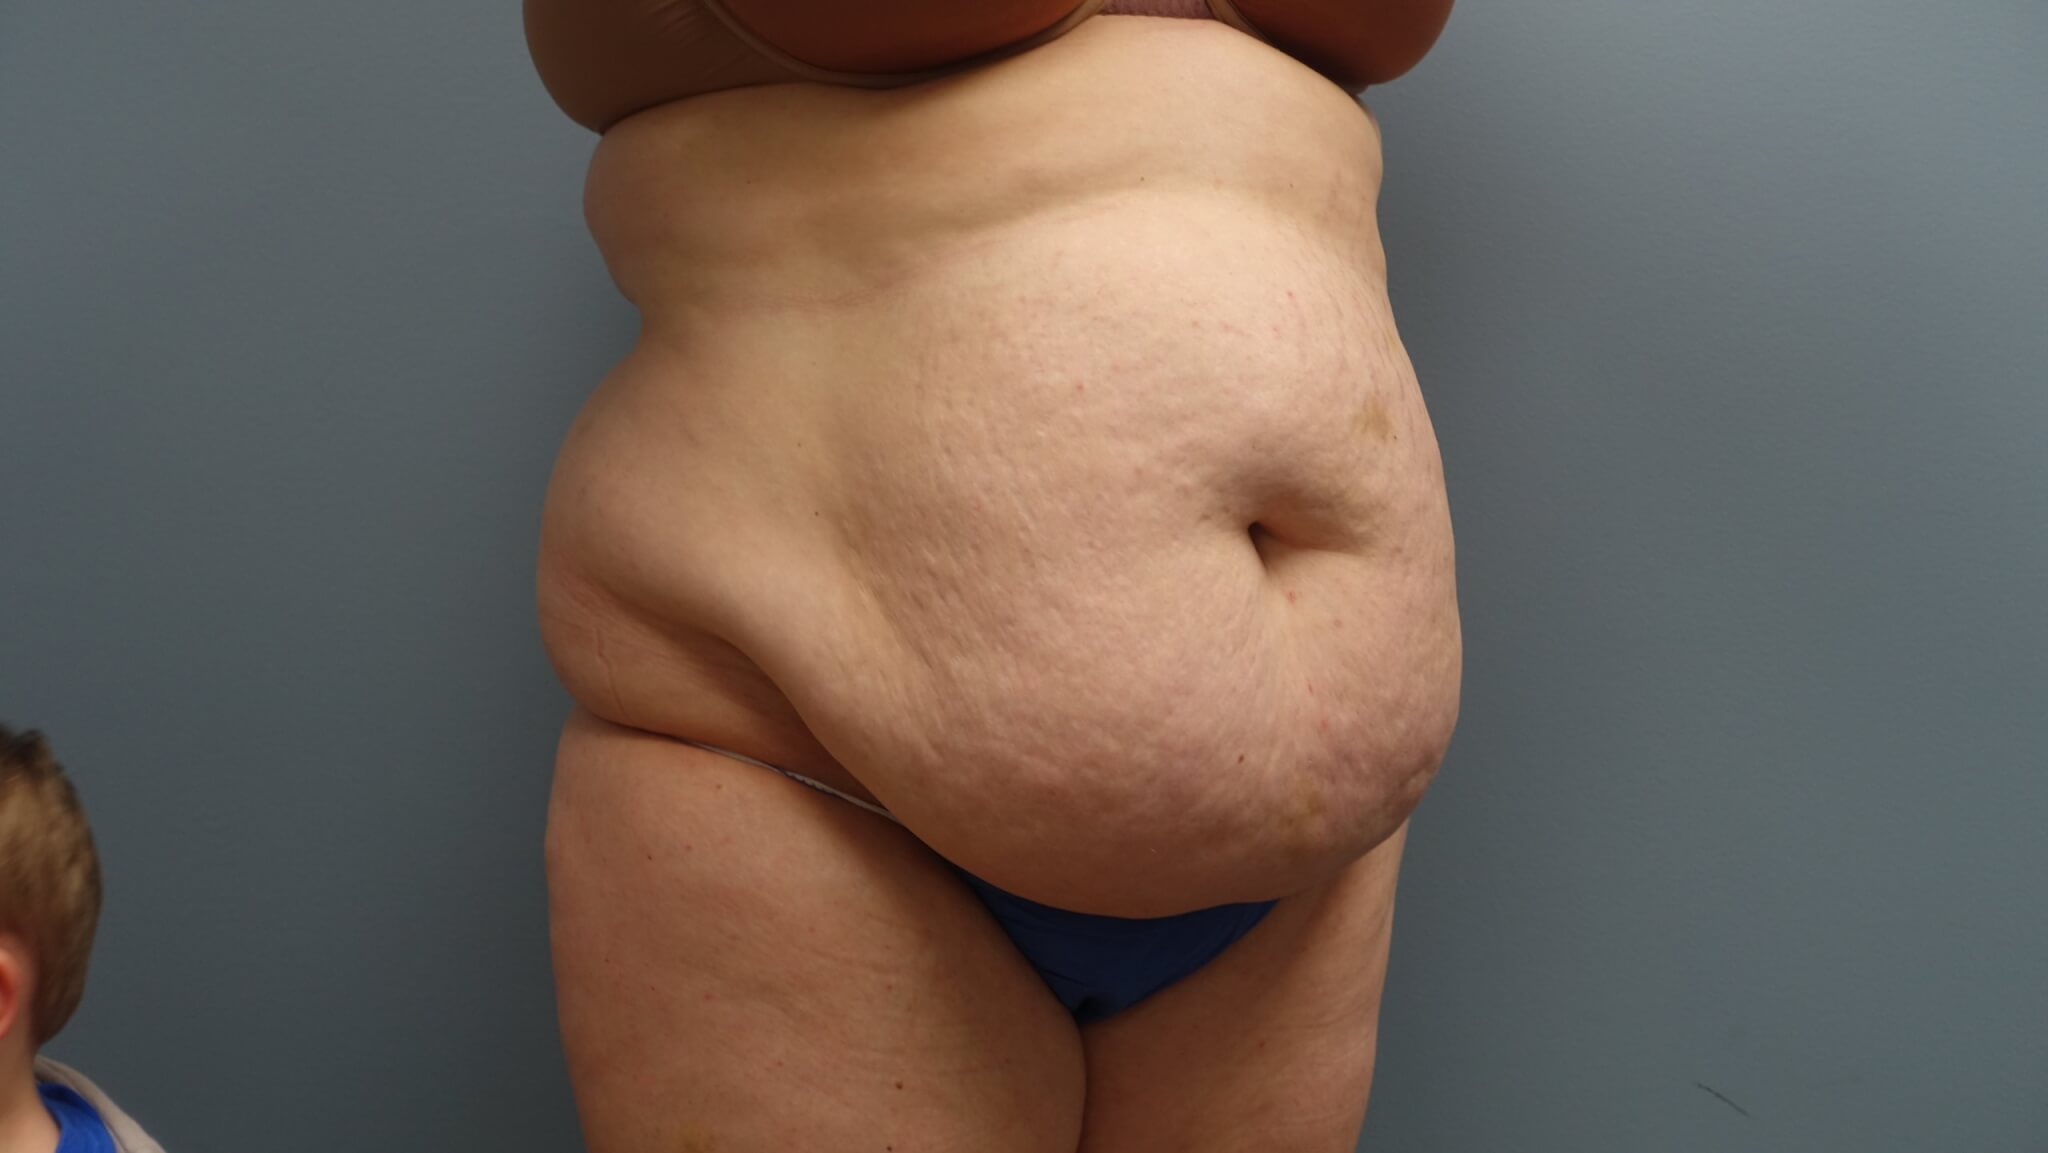 Before Tummy Tuck, Liposuction and Muscle Repair